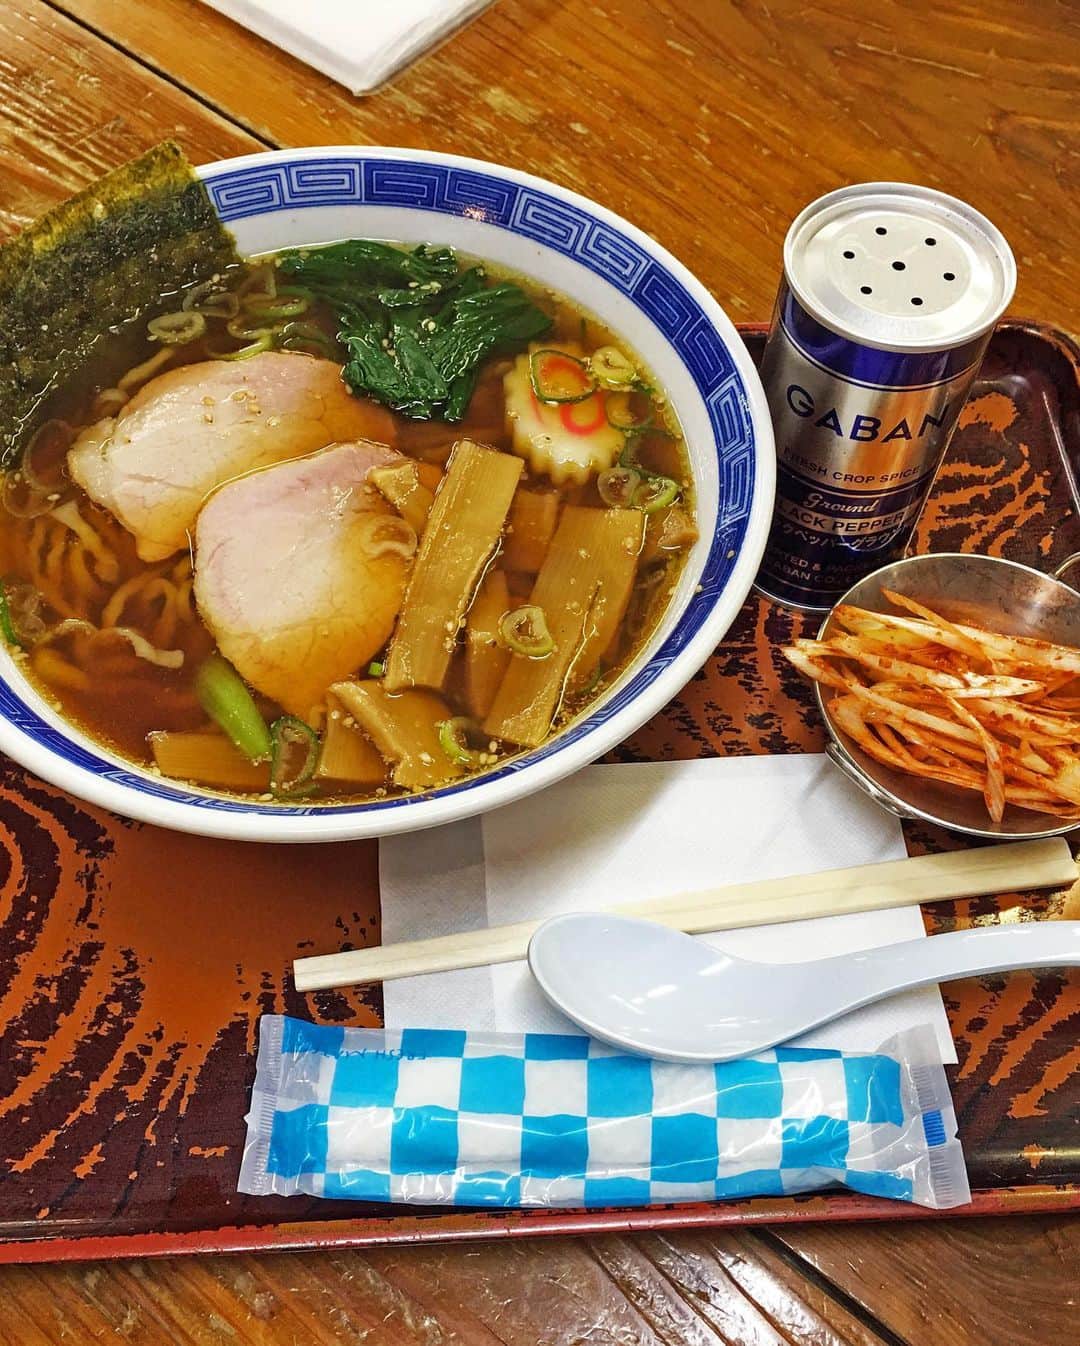 Rediscover Fukushimaさんのインスタグラム写真 - (Rediscover FukushimaInstagram)「Do you like RAMEN? 😍  ✨50 years ago, his father started this ramen and soba shop along the shore of Nanko lake. Today he continues the work that his father started, waking up everyday at 5 a.m. to make the ramen and soba noodles. Handmade, fresh, and delicious! You can taste the 50 years of love that has been poured into perfecting the recipe for these dishes.💕🍜  🍜This place has changed the ramen game for me, the soup was not too oily or too salty like some restaurants, it was perfectly balanced and delicious. 🥰The ingredients all tasted perfect.✨ It was truly an experience I will never forget and I can’t wait to go back and take my friends and family. 😋  🍜If you want to try some delicious Shirakawa ramen, please visit Kohanntei (湖畔亭) in Nanko park.   🍡At Kohanntei you can also try handmade Nanko dango, these are deliciously warm and fluffy rice cakes made by several shops in Nanko park. The kind that I tried was made with a mixture of mochi flour and soba flour topped with a sweet sauce or a homemade mash or sweet red beans. The perfect dessert to a perfect meal.😋  🍜Did you know that Fukushima is famous for ramen?  🌎🌏🌍🇯🇵Many ramen shops around Japan and around the world use recipes and techniques for making ramen that originated in Fukushima prefecture. Also, did you know that Fukushima prefecture is the third largest prefecture in all of Japan? The culture of the various regions can vary greatly so there are actually several types of ramen to try in Fukushima! I can’t wait to try them all!  🍜Check out this link to learn more about the various types of RAMEN in Fukushima: https://fukushima.travel/page/local-food  #ramen #foodie #JapanTrip #local #eatlocal #shoplocal #Japanesefood #shirakawaramen #FamilyOwned #delicious #foodgram #foodoftheday #warm #warmup #yummy #NankoPark #Kohanntei #FukushimaTrip! #VisitFukushima! #dango #mochi #ricecakes」10月26日 11時49分 - rediscoverfukushima